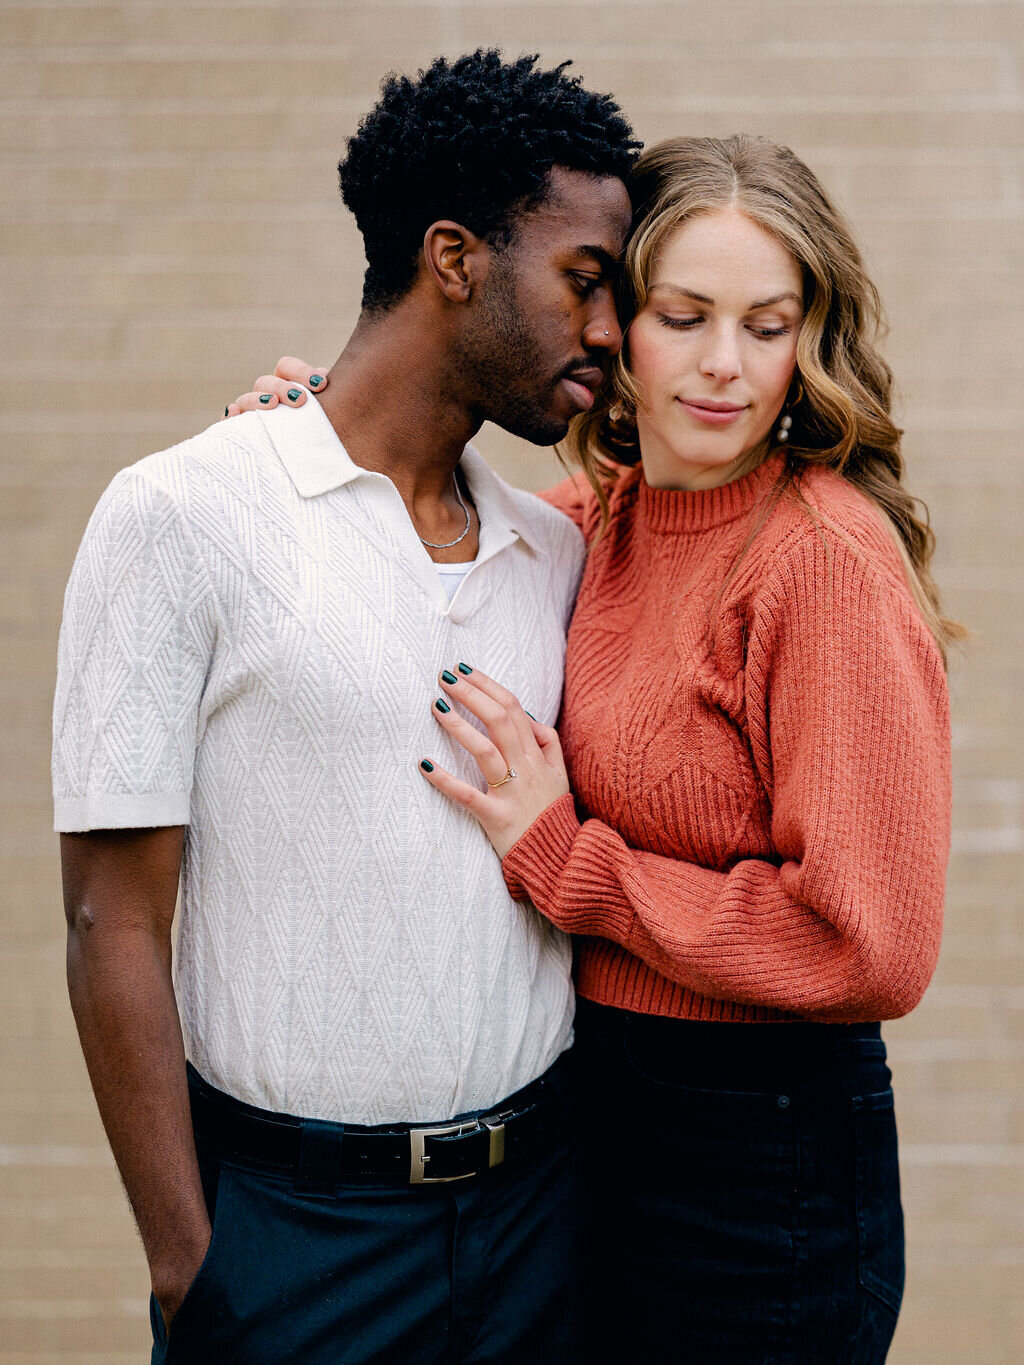 A couple stands against a white brick wall. They are embracing each other and not looking at the camera.